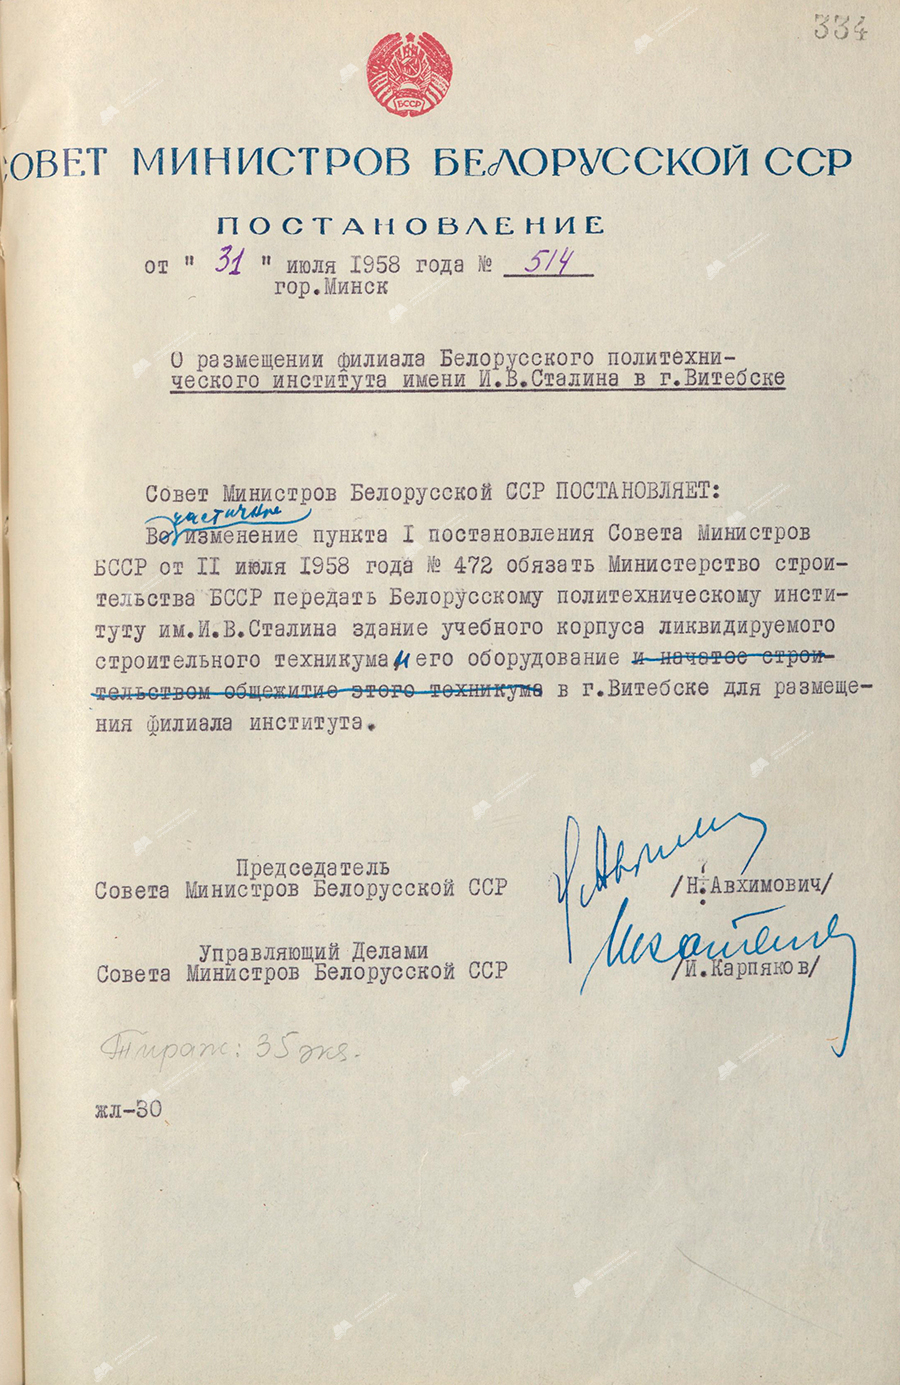 Resolution No. 514 of the Council of Ministers of the BSSR «On the location of a branch of the Belarusian Polytechnic Institute named after I.V. Stalin in Vitebsk»-стр. 0